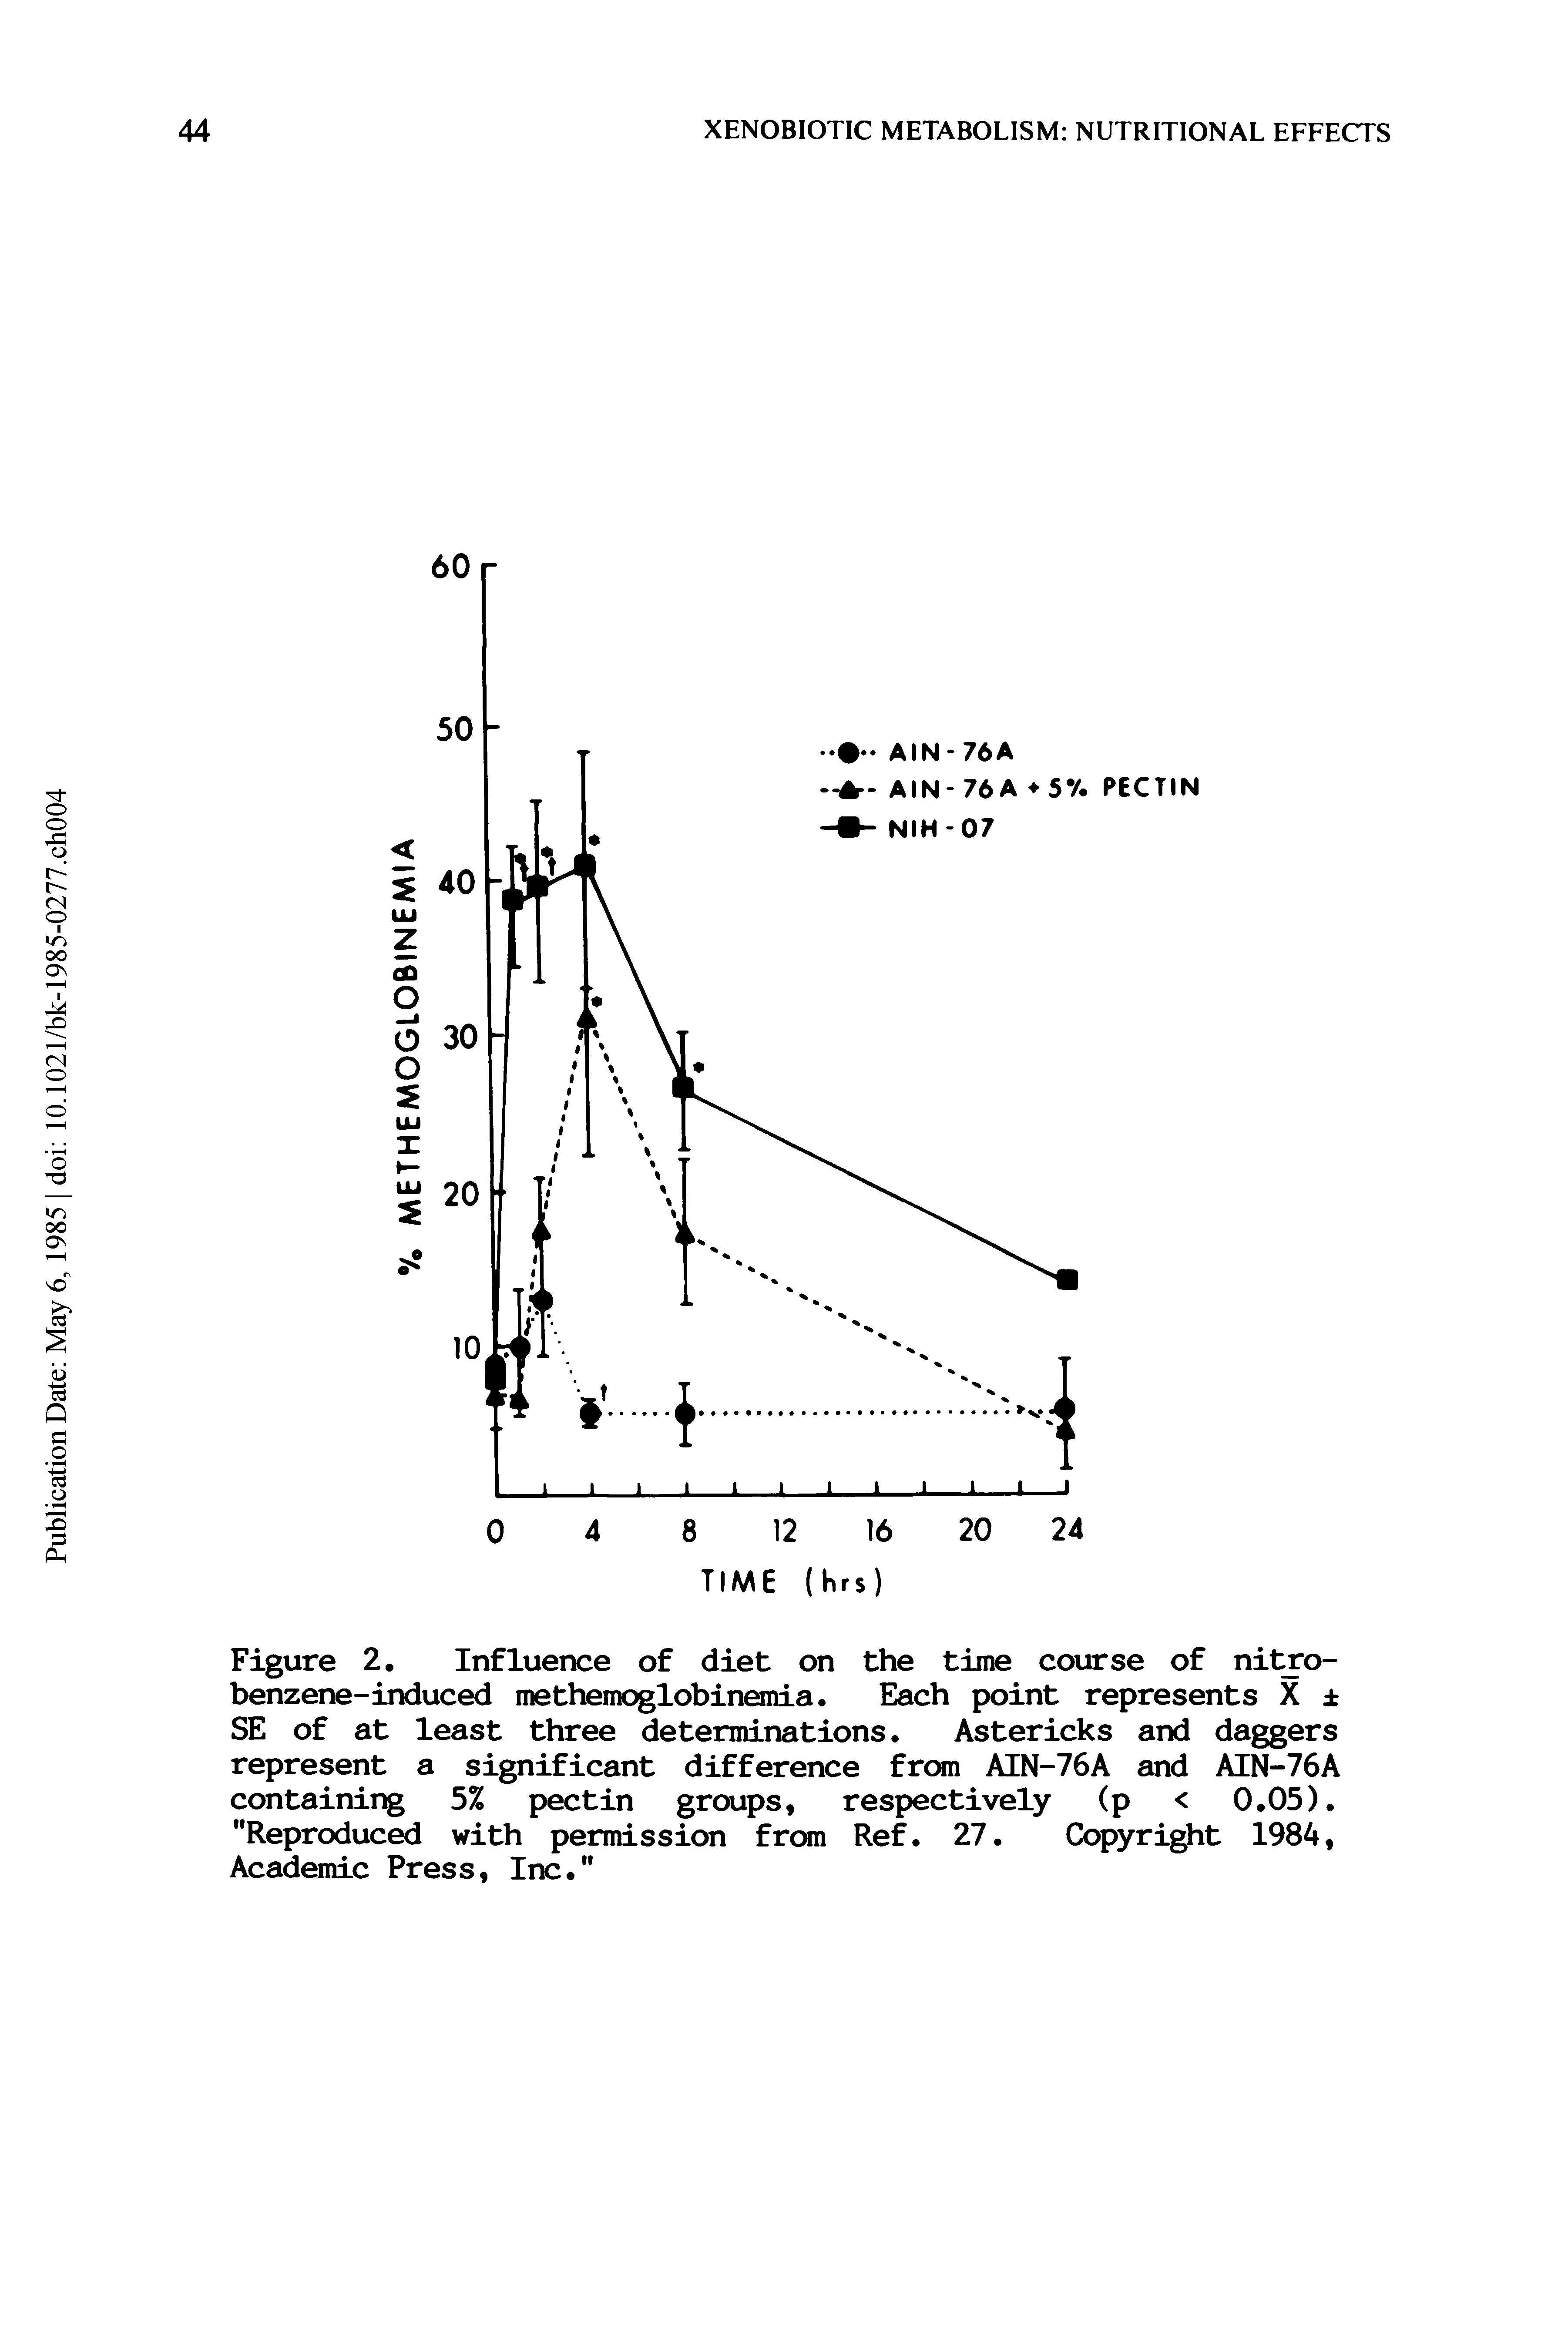 Figure 2. Influence of diet on the time course of nitrobenzene-induced methemoglobinemia. Each point represents X SE of at least three determinations. Astericks and daggers represent a significant difference from AIN-76A and AIN-76A containing 5% pectin groups, respectively (p < 0.05).